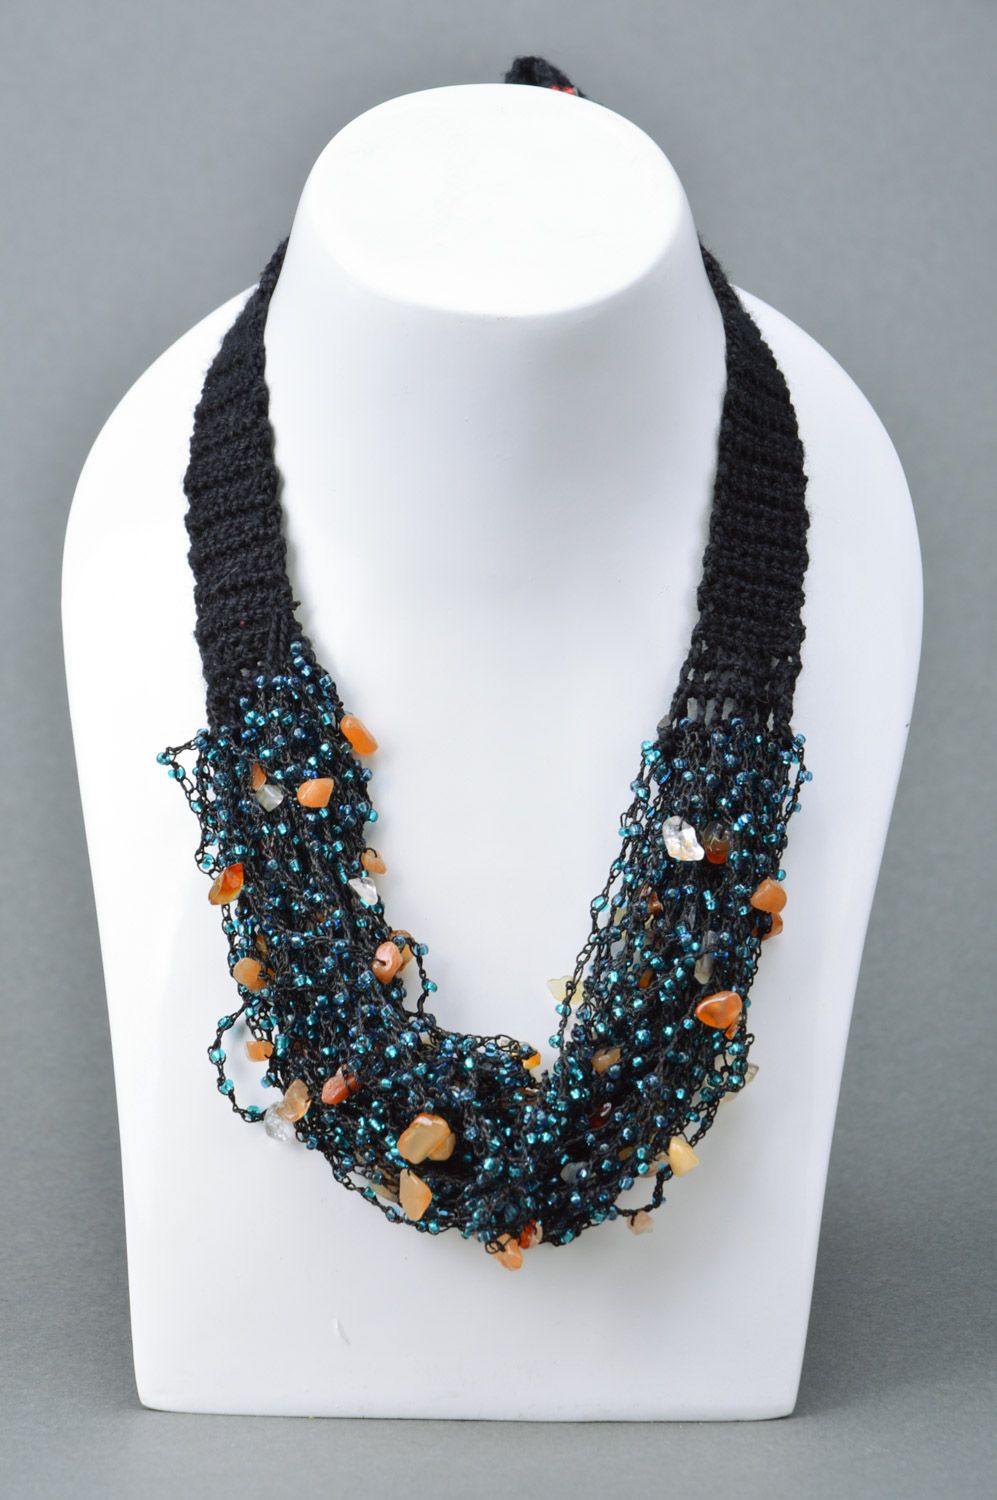 Handmade elegant black necklace woven of threads and beads with button fastener photo 1